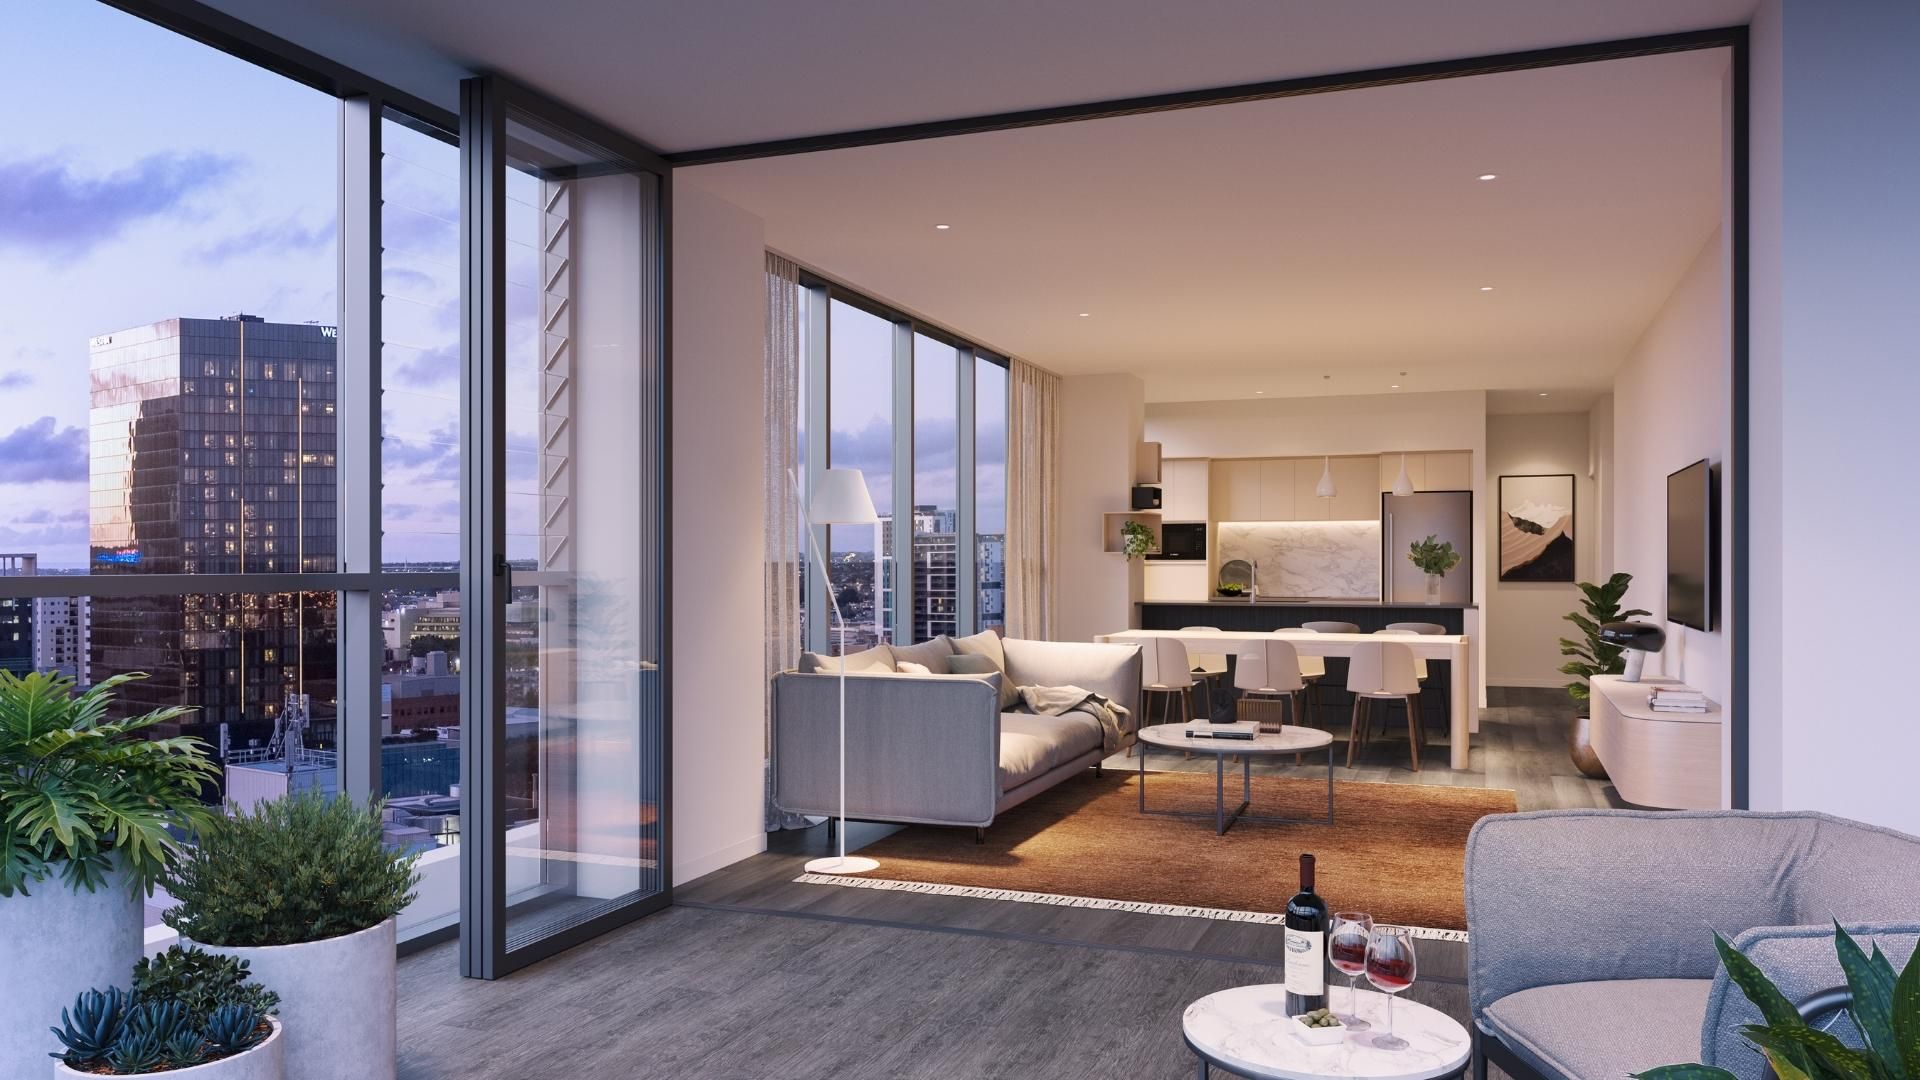 1 bedrooms New Apartments / Off the Plan in 1602/238 Adelaide Terrace PERTH WA, 6000